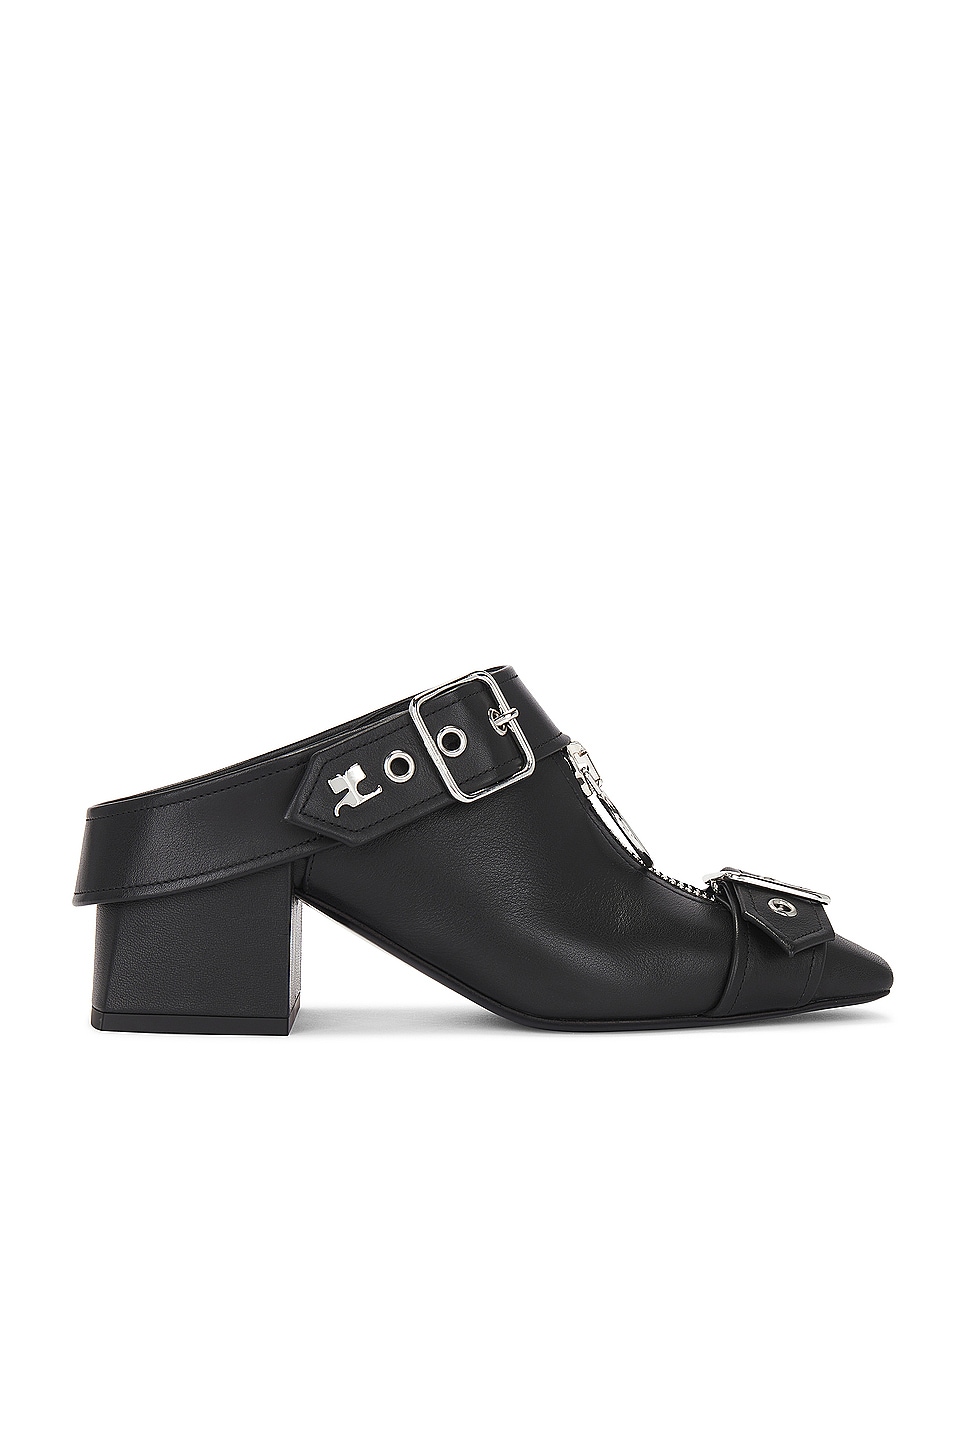 Image 1 of Courreges Gogo Leather Mules in Black